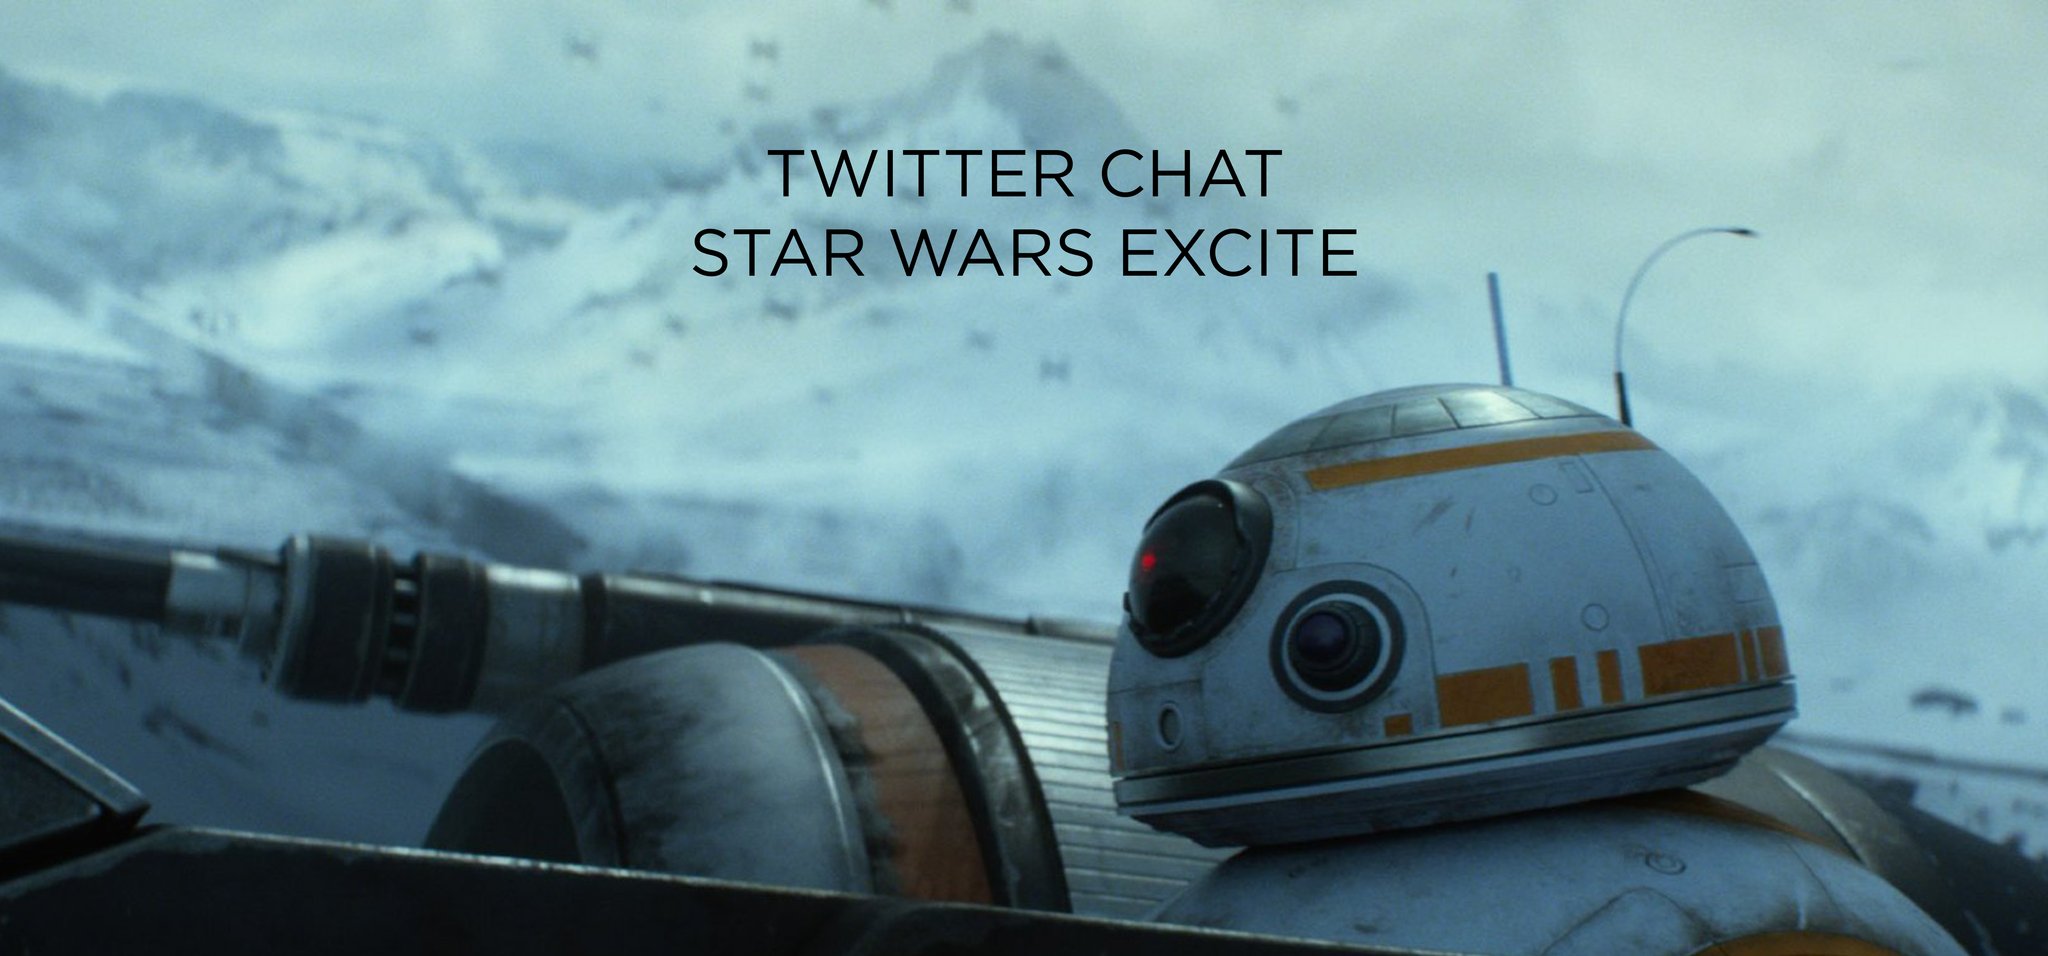 Twitter Chat: Star Wars Excite